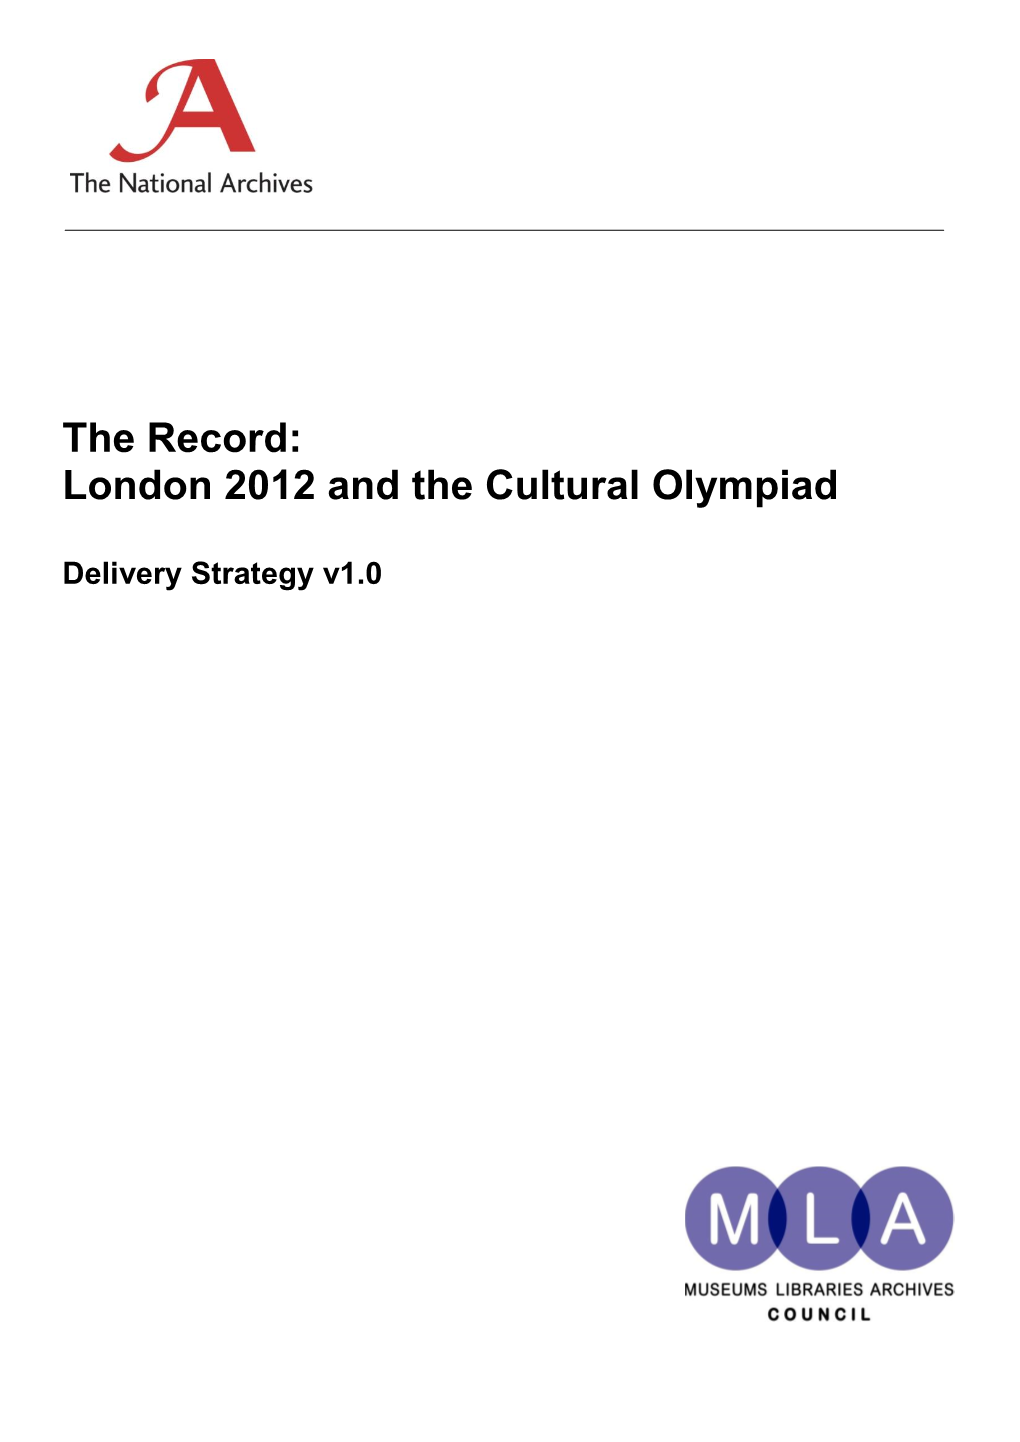 London 2012 and the Cultural Olympiad Delivery Strategy